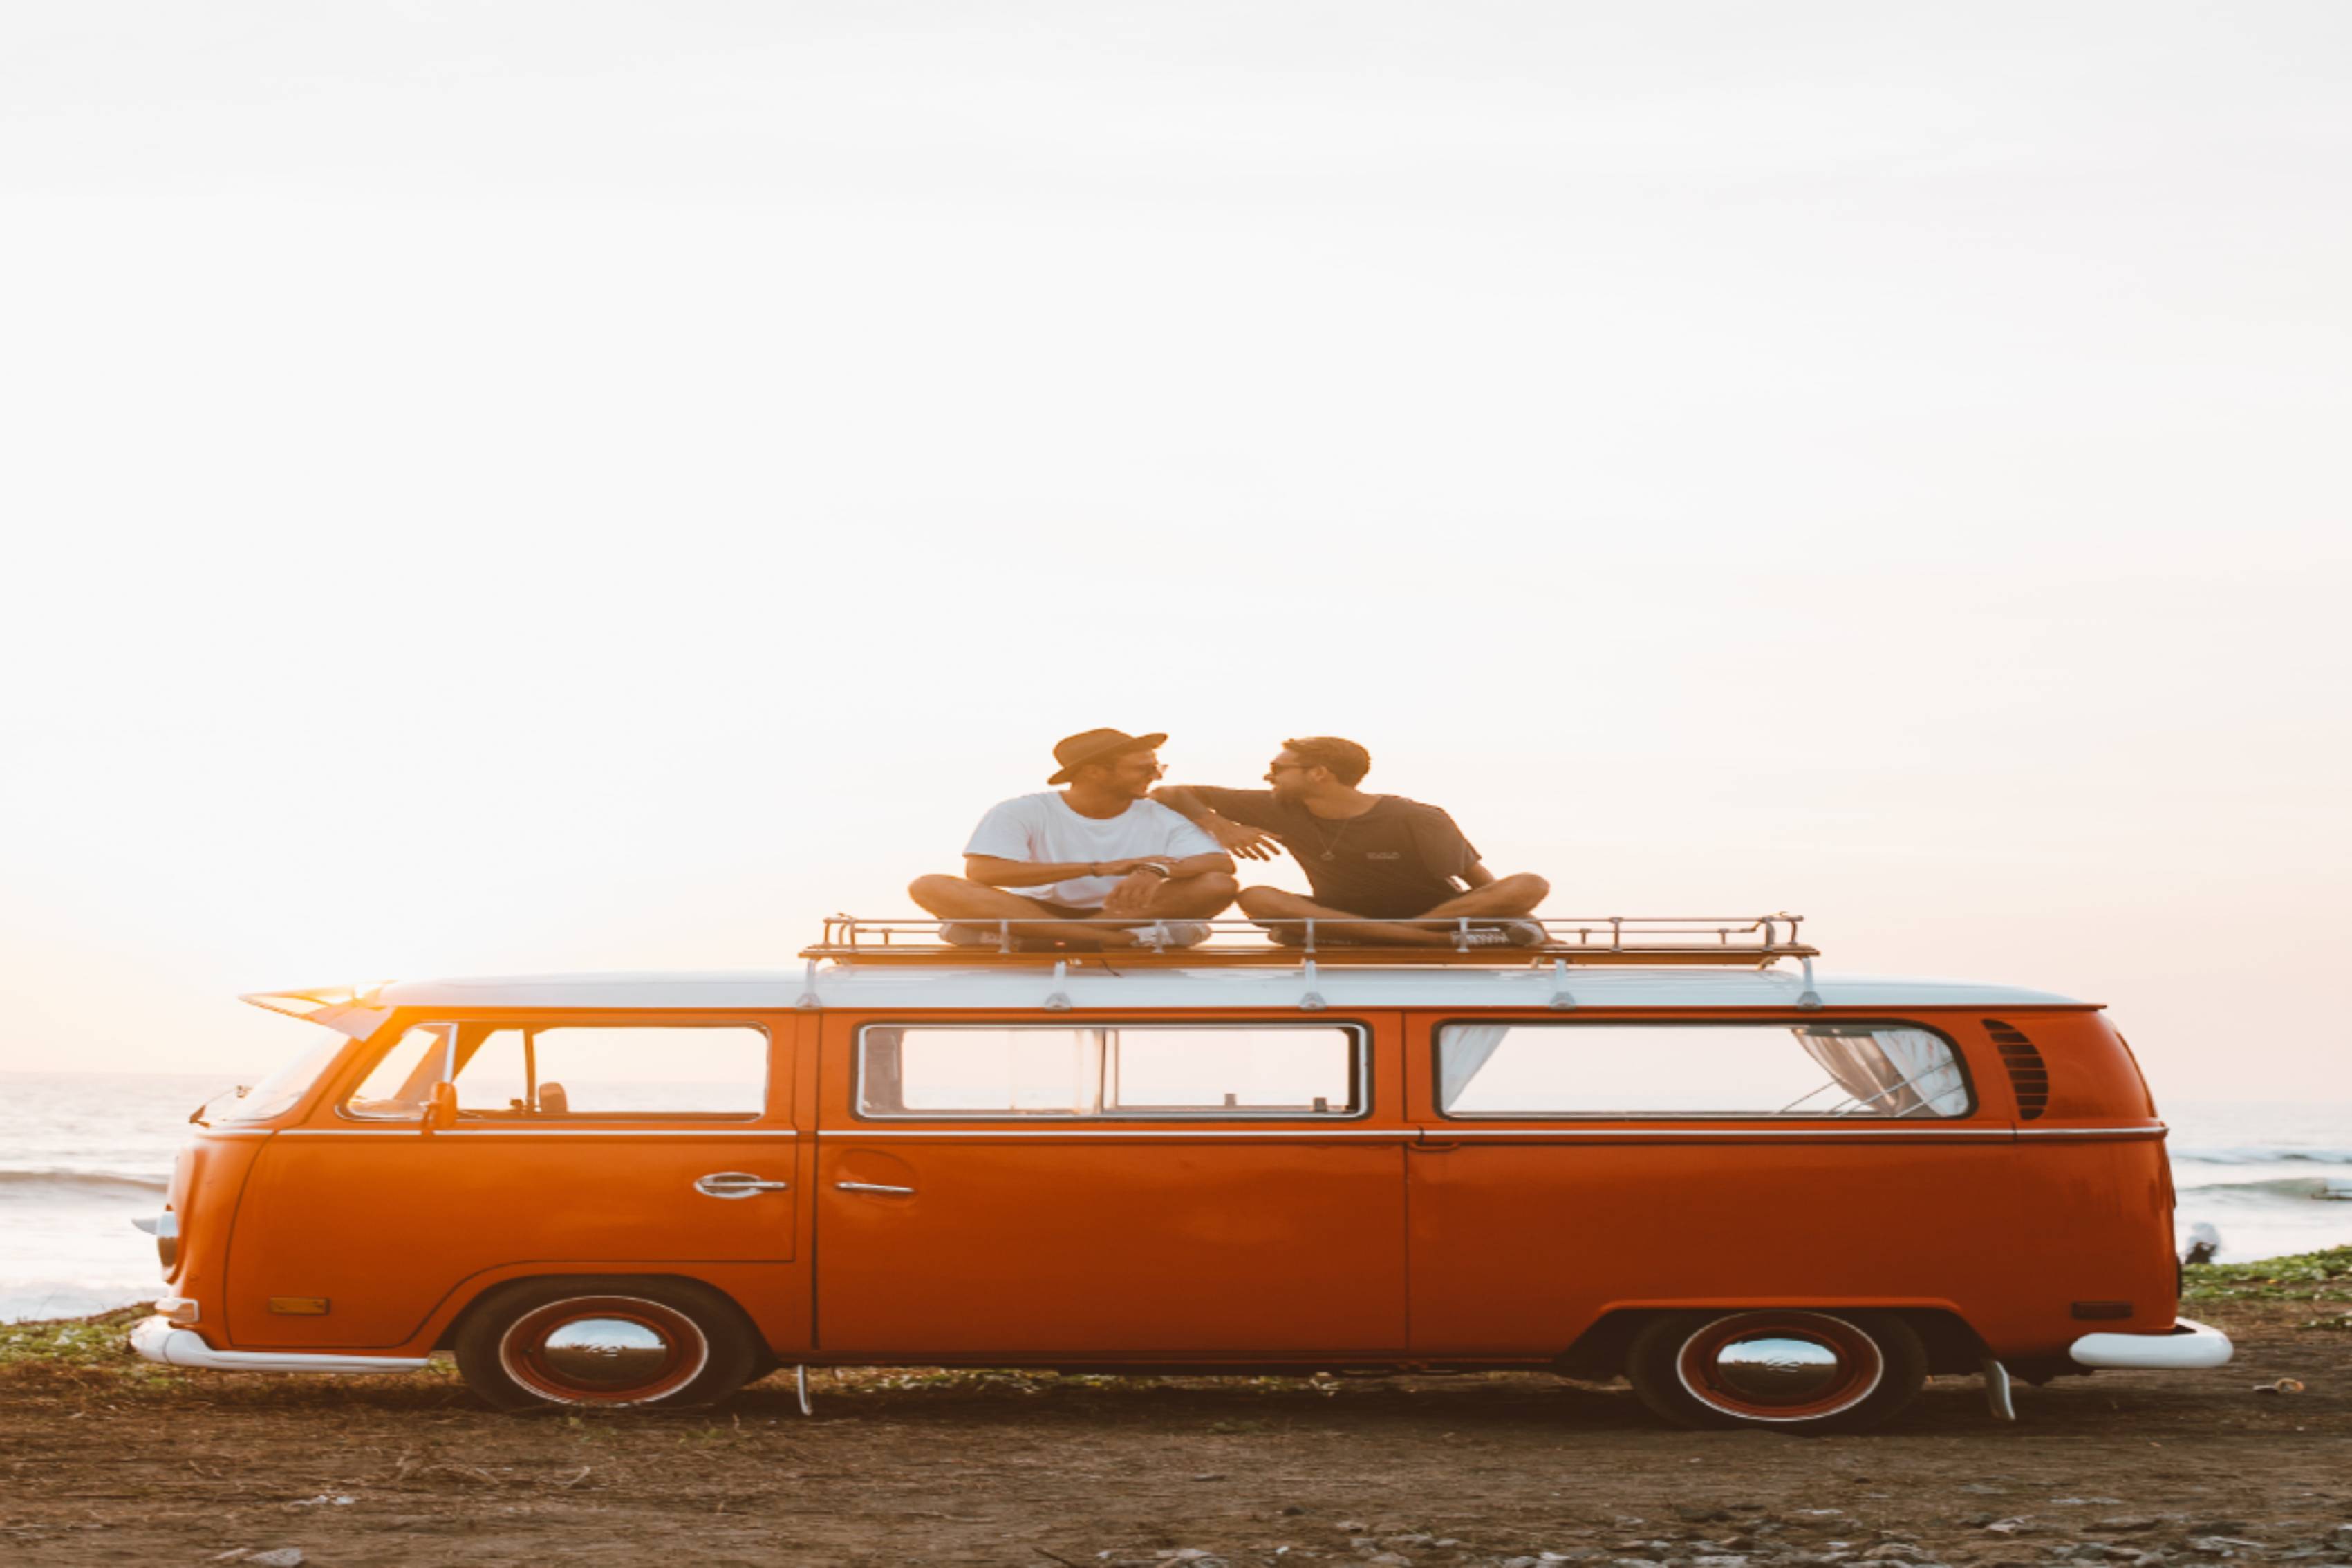  The Pros and Cons of Road Trips and How to Plan a Memorable One